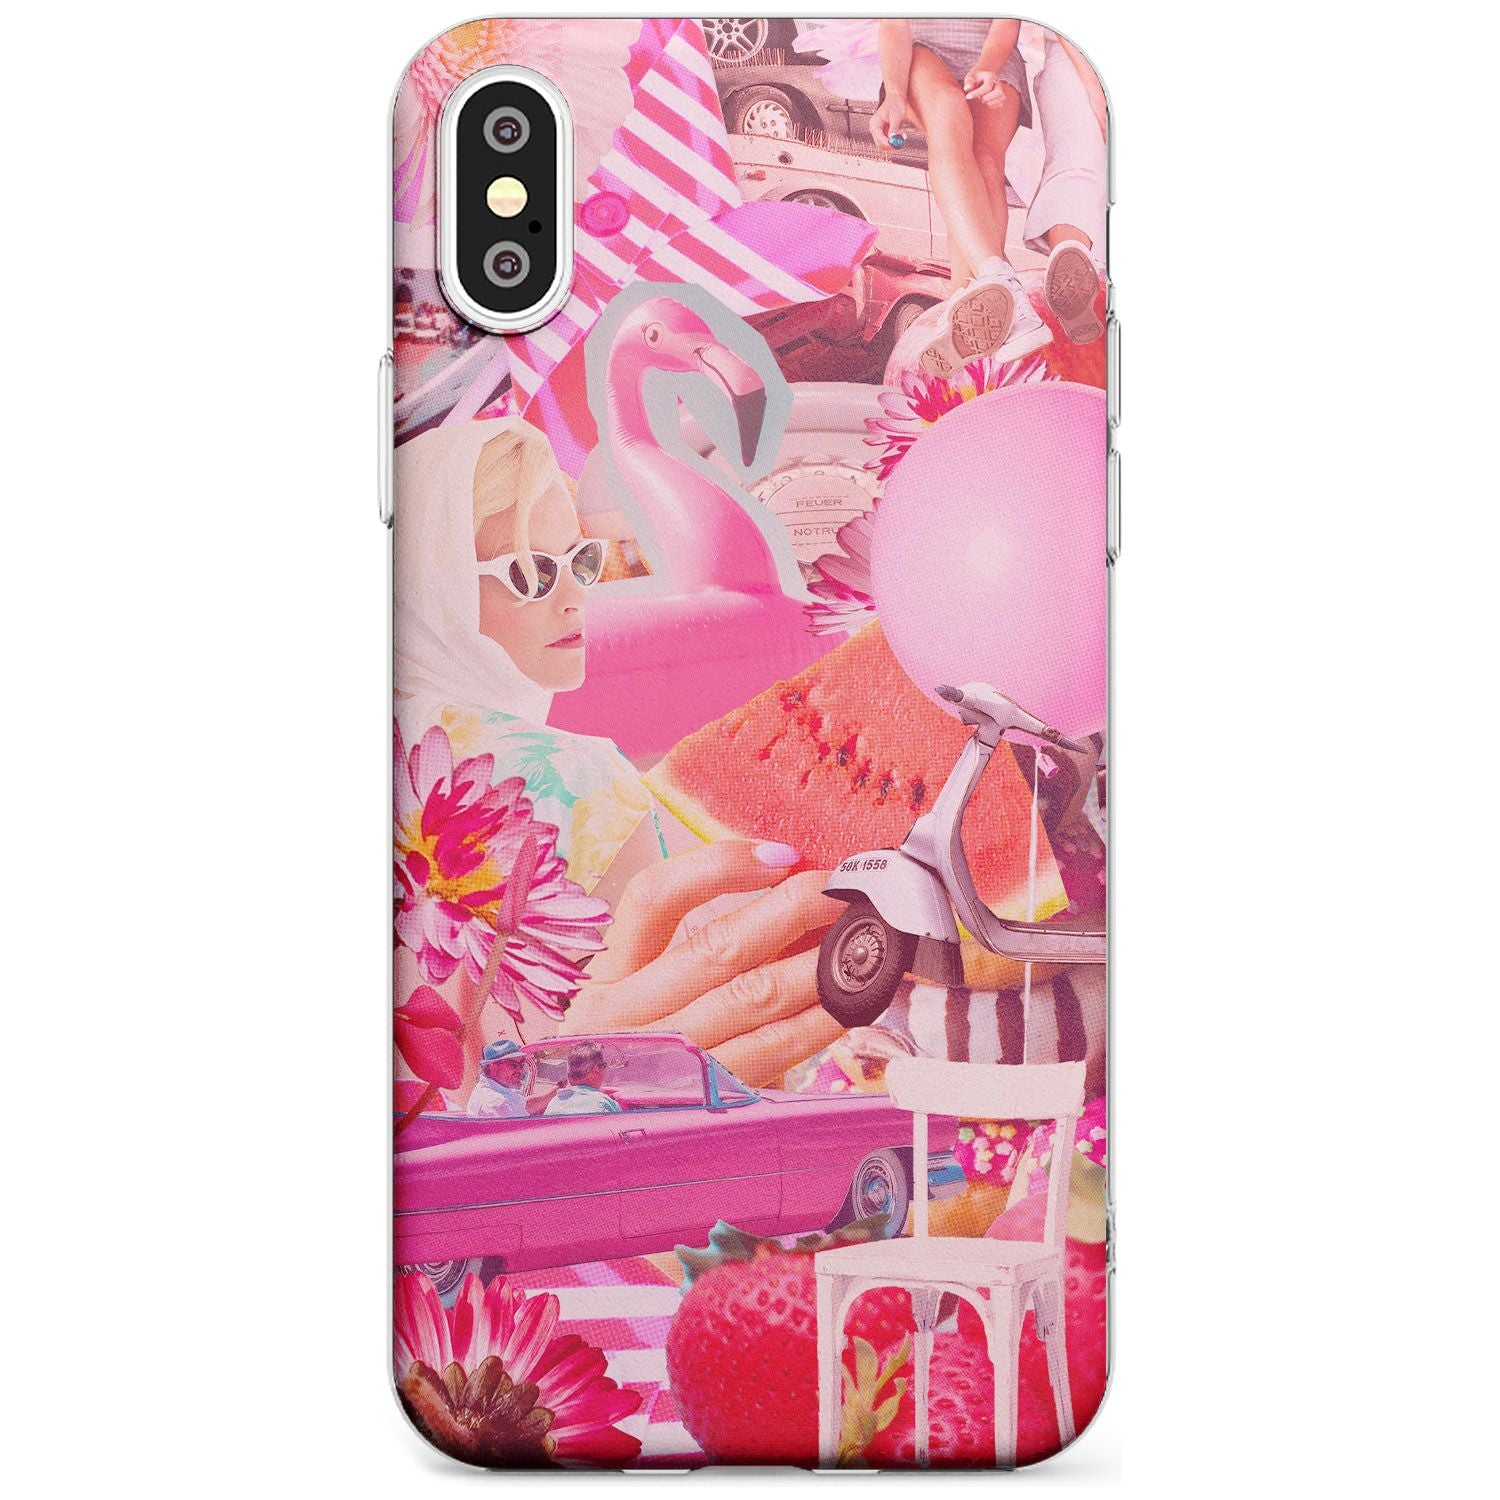 Vintage Collage: Pink Glamour Slim TPU Phone Case Warehouse X XS Max XR